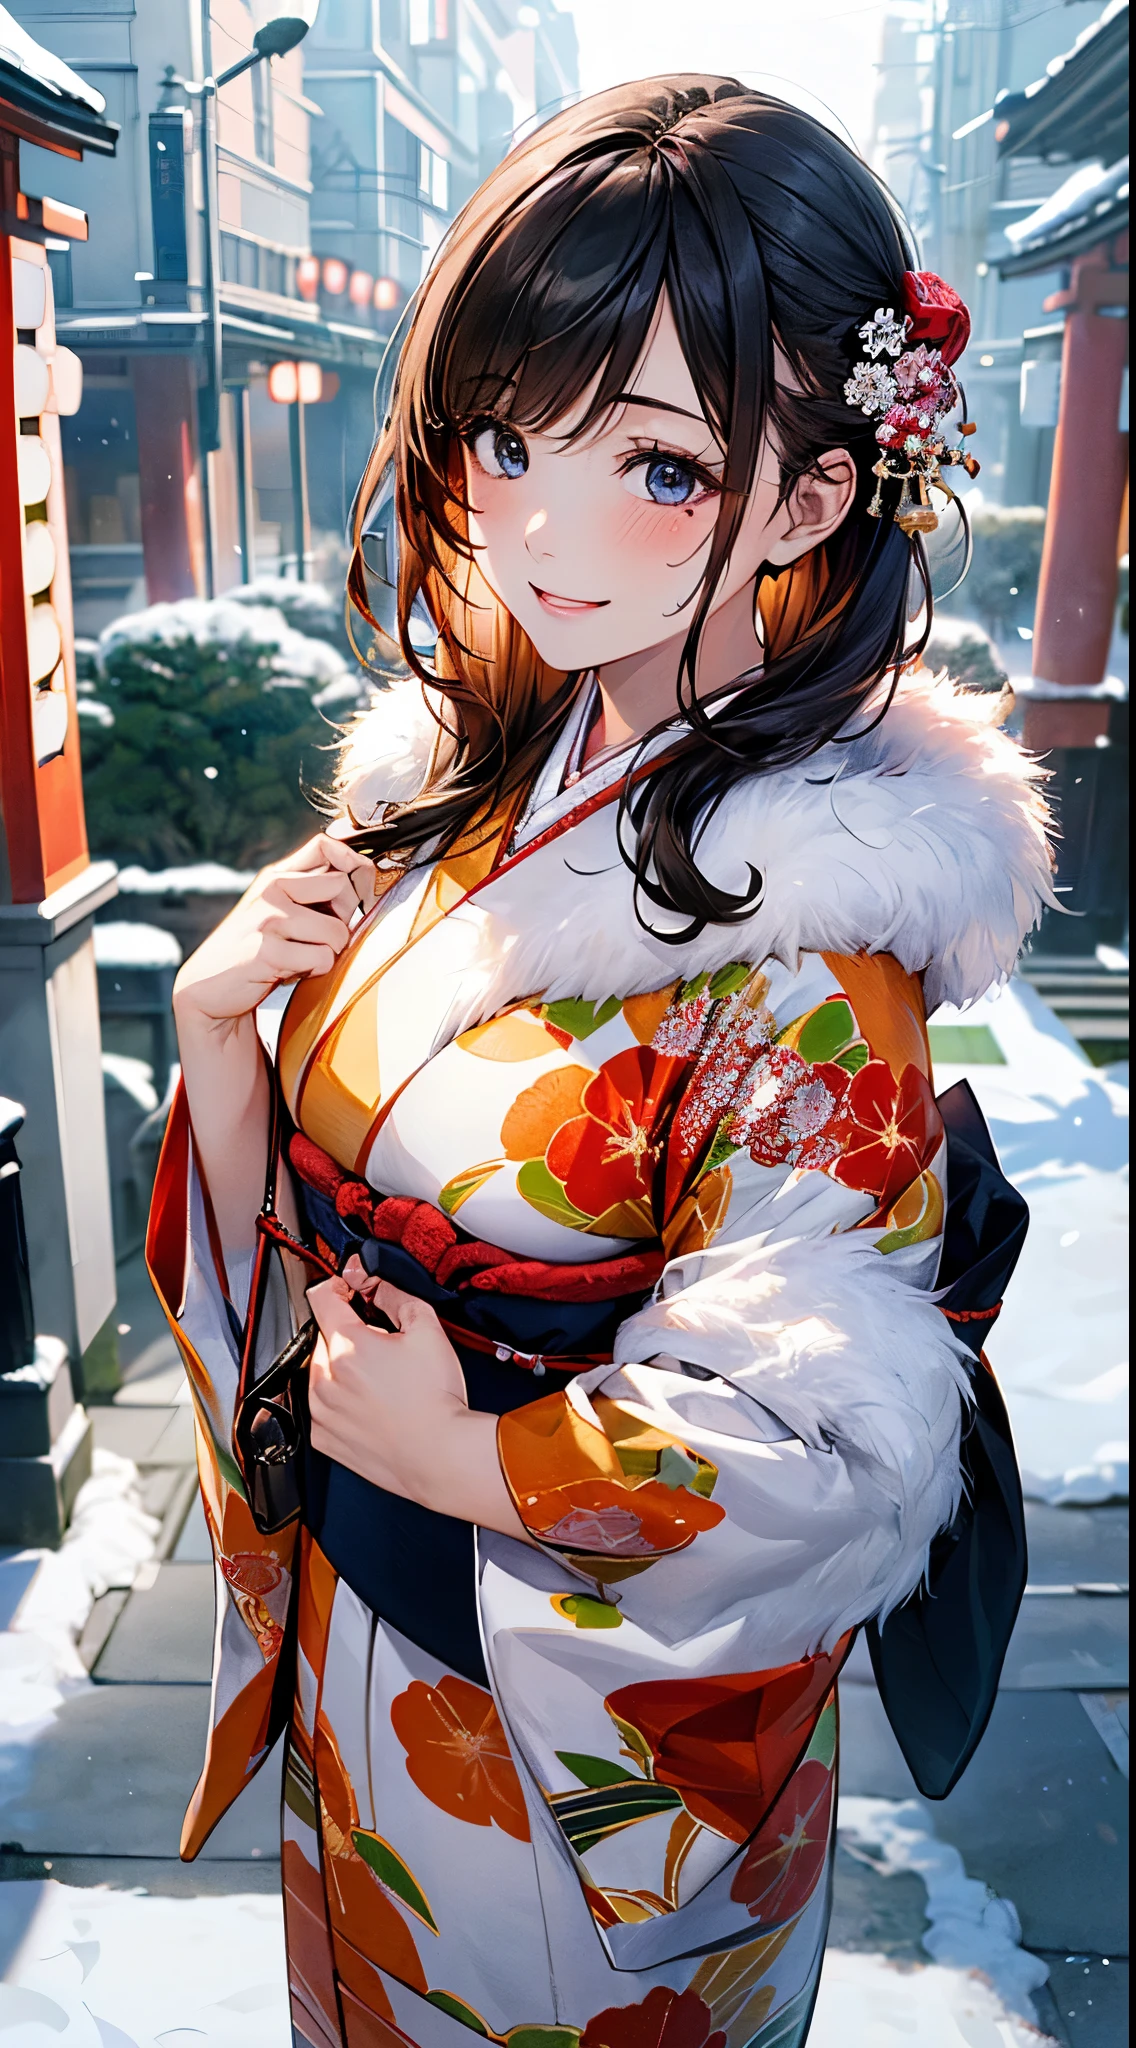 ((perfect anatomy, anatomically correct, super detailed skin)), 
1 girl, japanese, high school girl, shiny skin, large breasts:0.5, looking up, watching the view, 
beautiful hair, beautiful face, beautiful detailed eyes, (middle hair:1.5, japanese hair:1.5), black hair, blue eyes, babyface, mole under eye, 
(((luxury floral kimono, fur muffler), hair ornament)), 
((smile:1.5, open your mouth wide)), walking, holding a phone, Holding a handbag, 
(beautiful scenery), winter, dawn, (new year's day, first visit), hokkaido, sapporo, outside hokkaido shrine, crowd, snow, snowfall:1.5, freezing weather, frost, 
(8k, top-quality, masterpiece​:1.2, extremely detailed), (photorealistic), beautiful art, visual art, depth of fields, natural lighting,